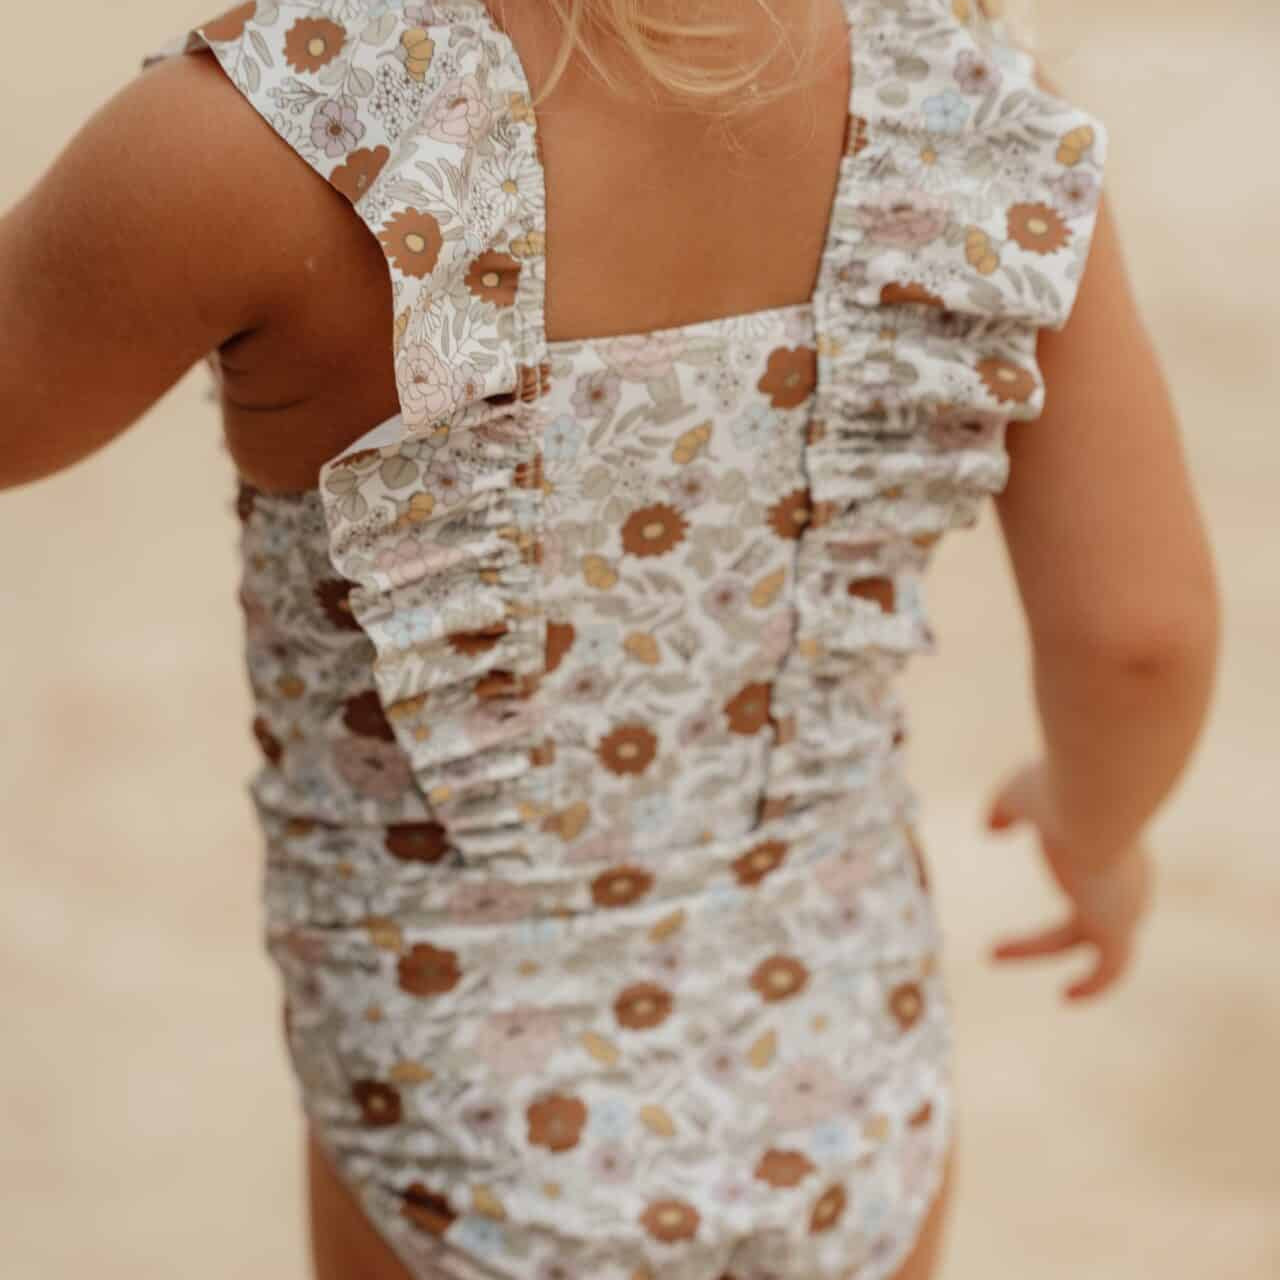 Child wearing a Little Dutch vintage floral ruffled swimsuit made from recycled polyester, perfect for swimming and outdoor play.